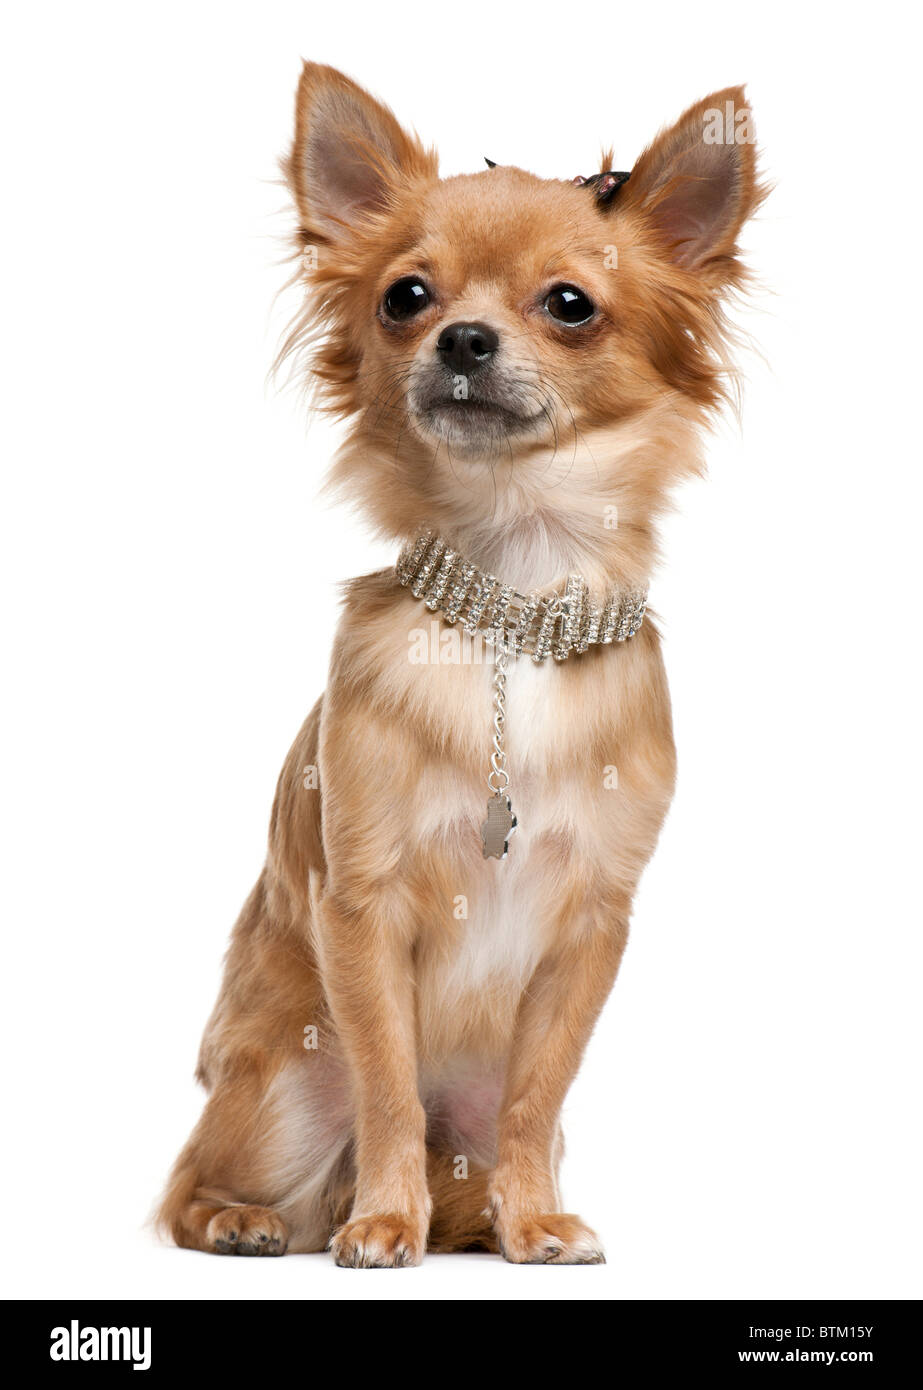 Chihuahua, 18 months old, sitting in front of white background Stock Photo